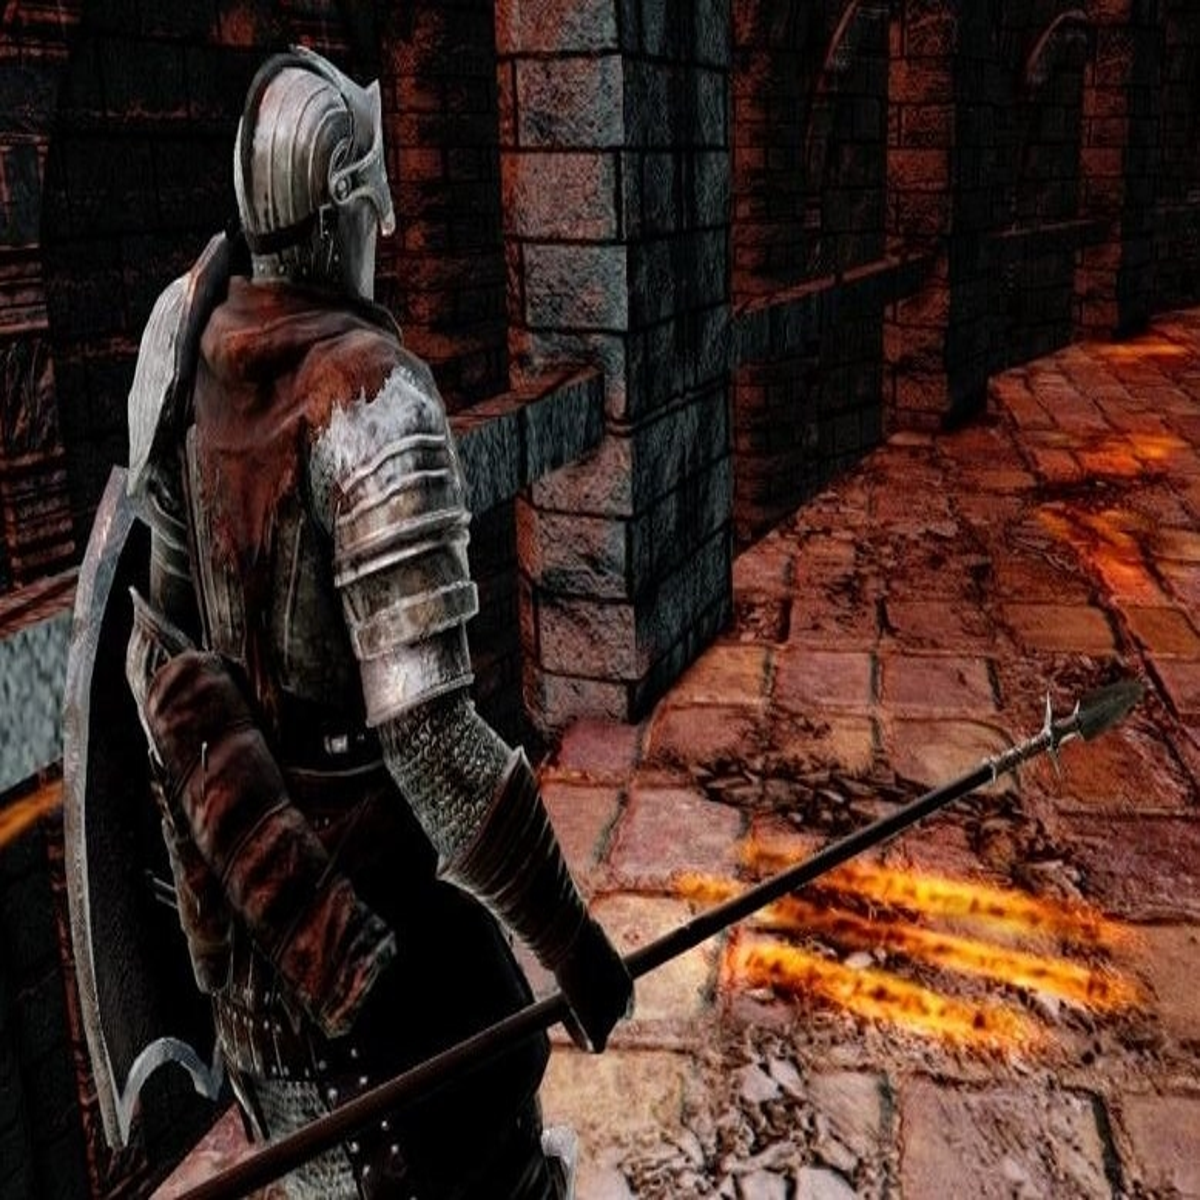 Massive Dark Souls 2 patch introduces the Scholar of the First Sin